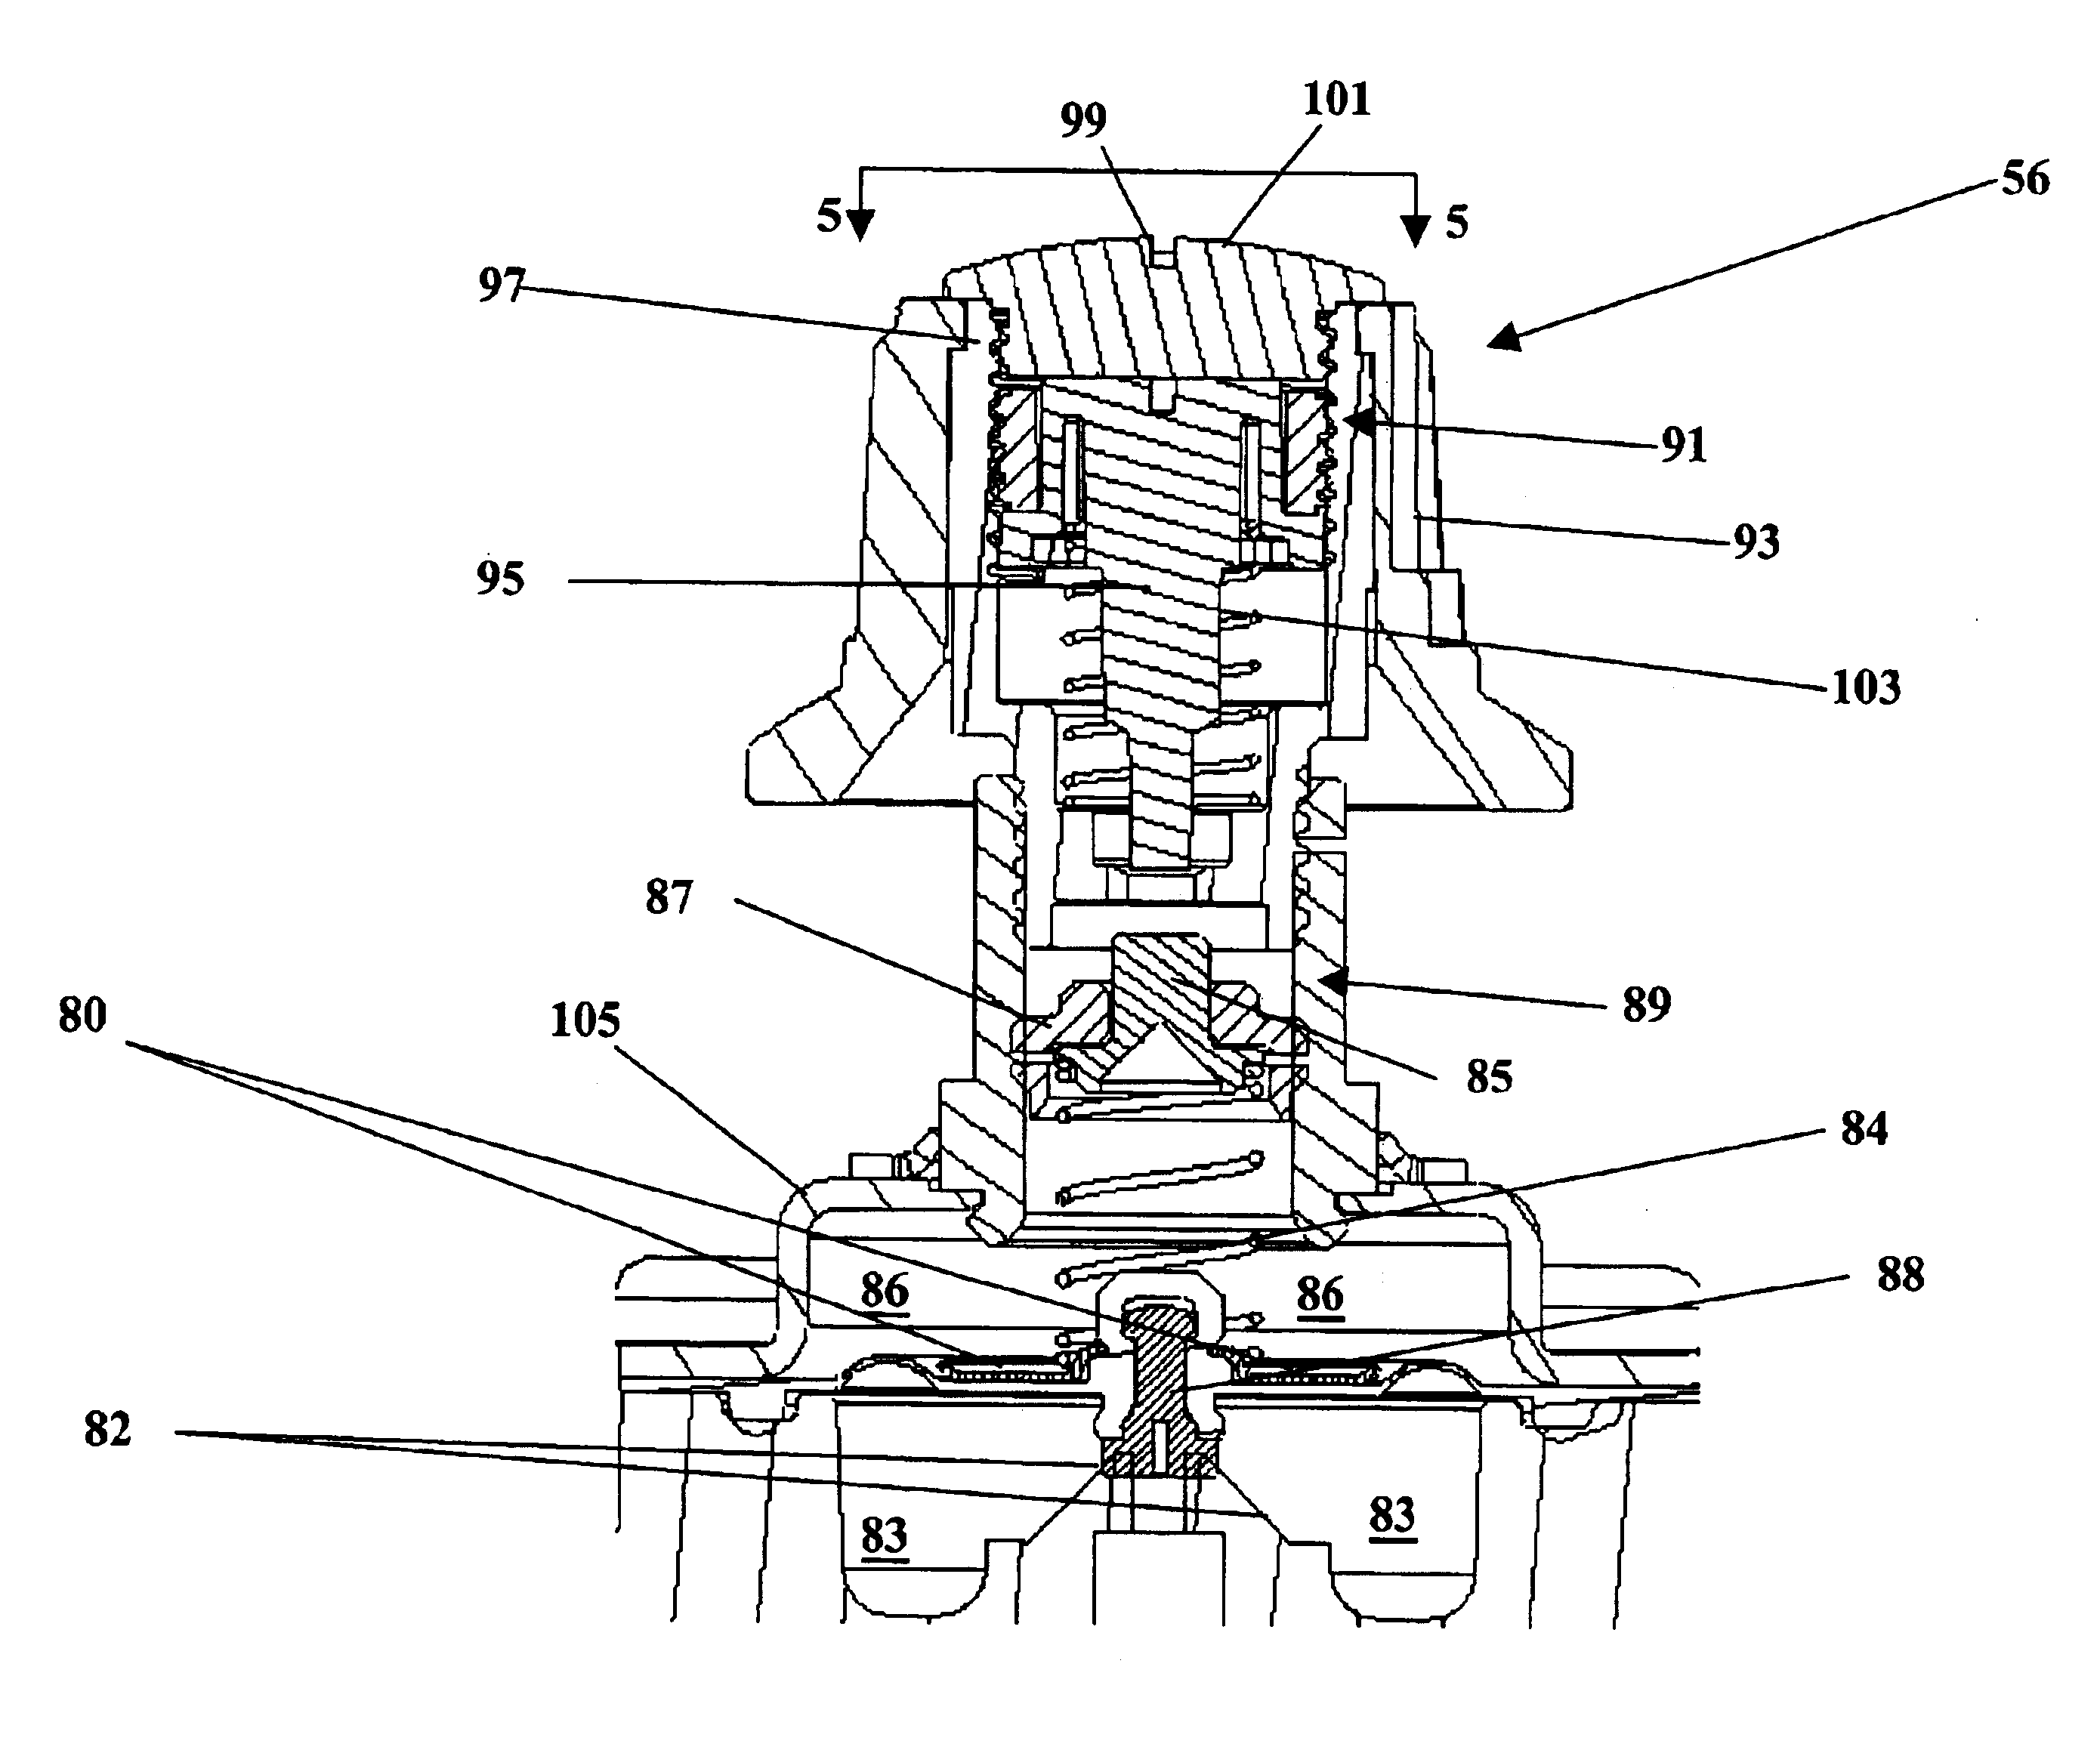 Convertible control device capable of regulating fluid pressure for multiple fluid types and associated method of use